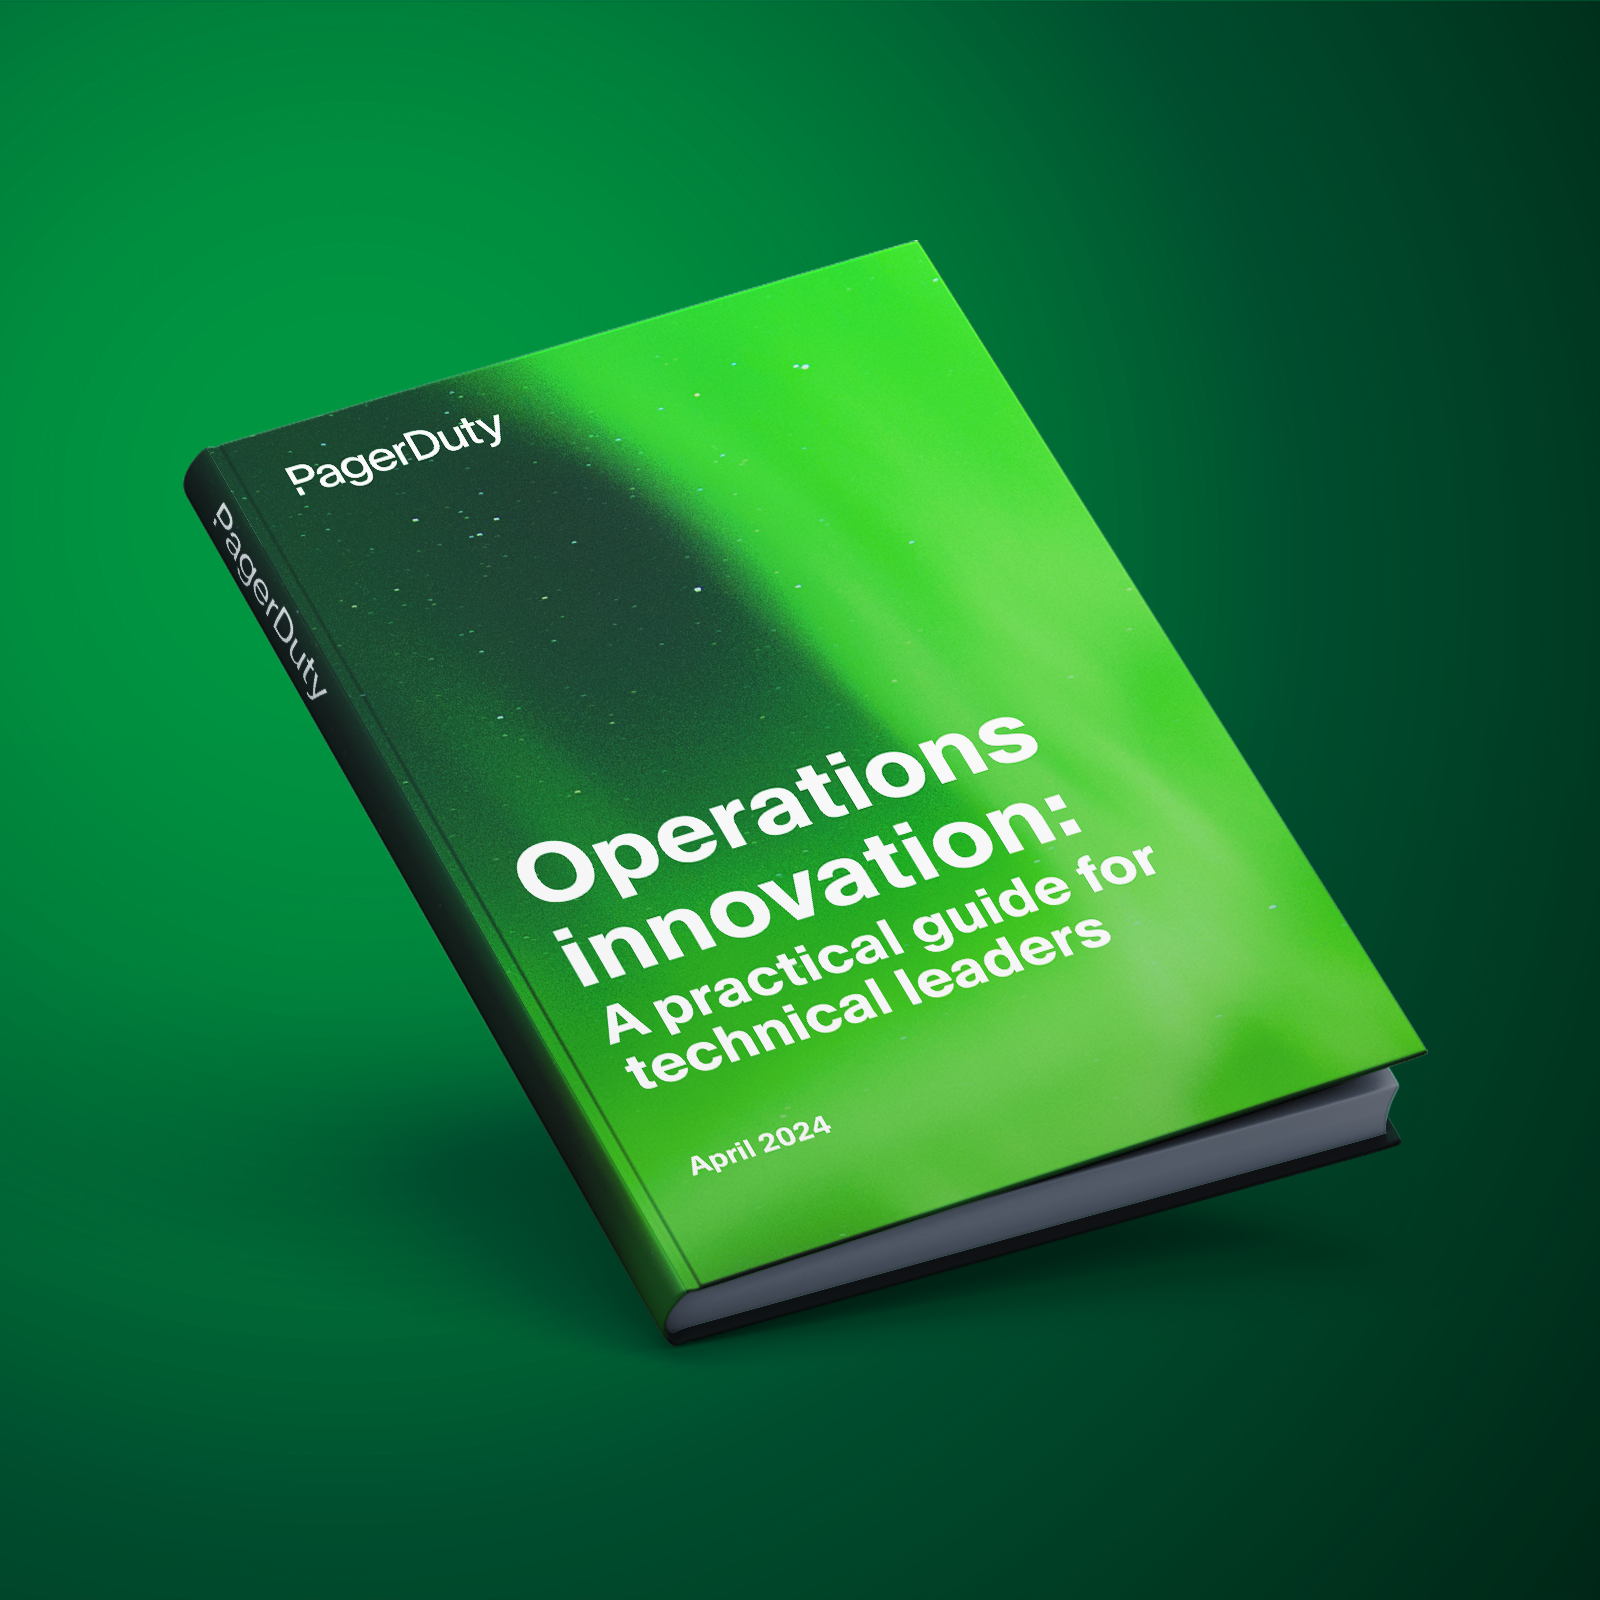 Operations innovation: A practical guide for technical leaders